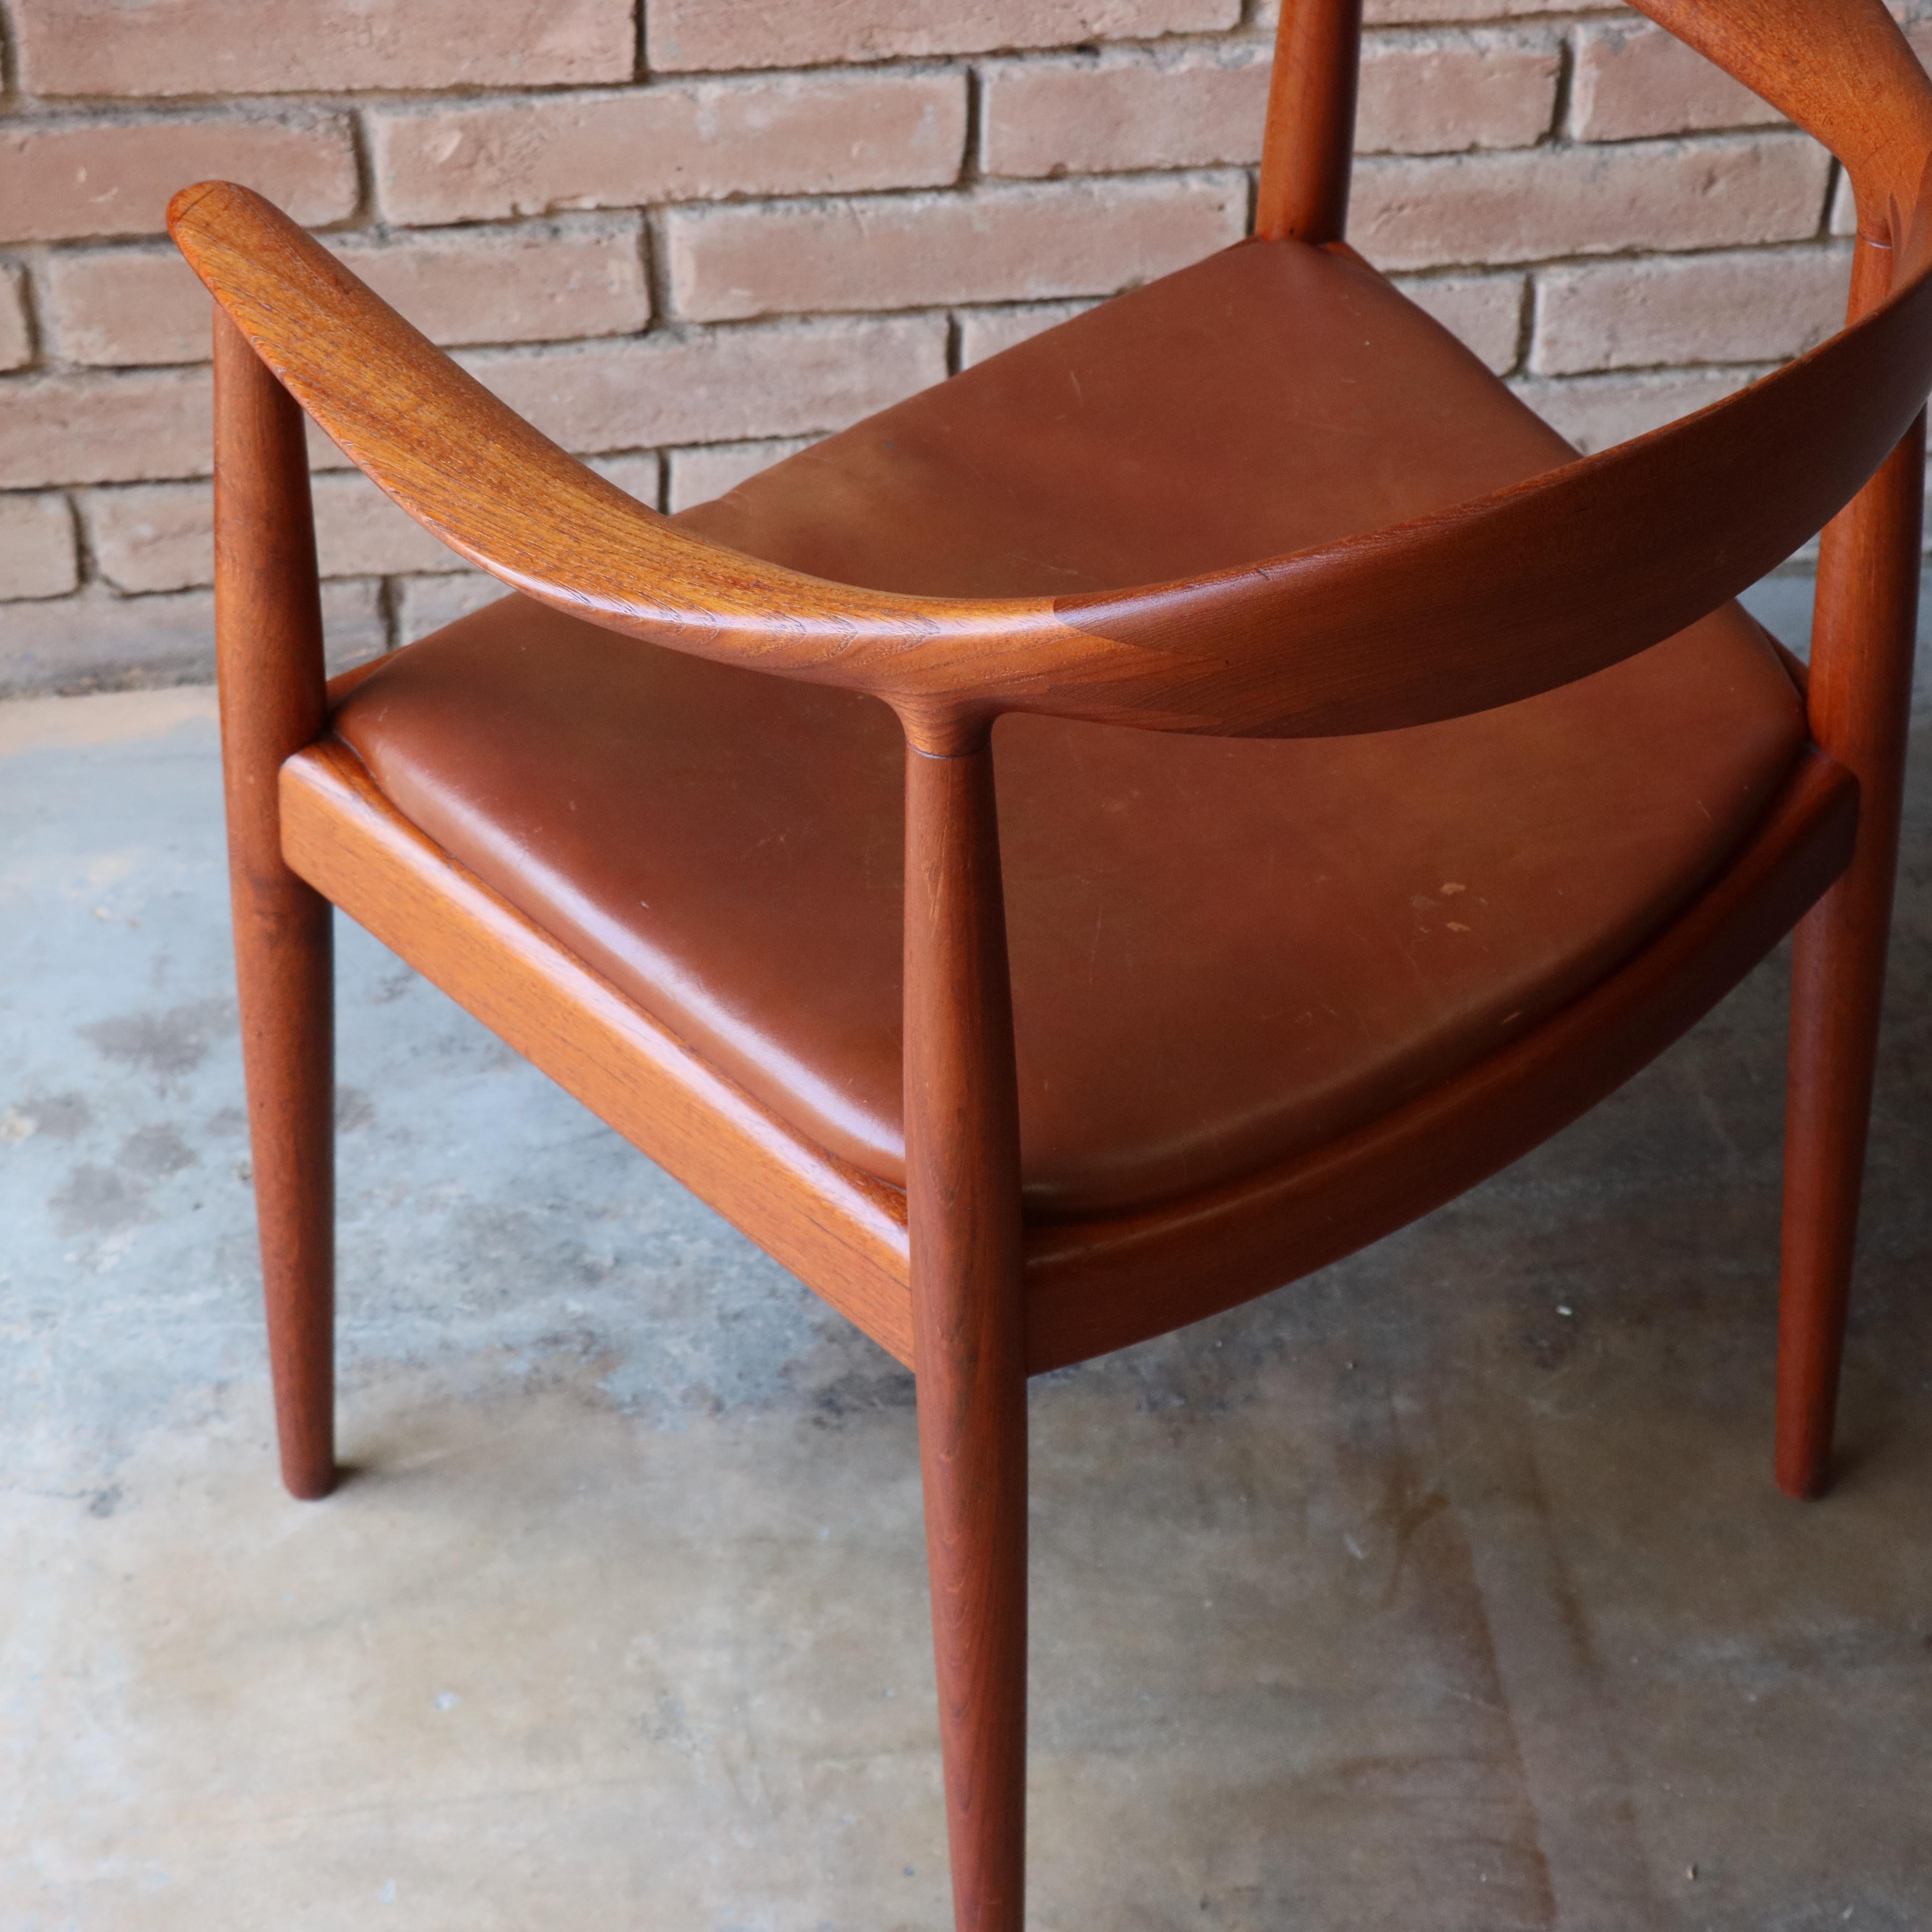 Hand-Carved Early Hans J. Wegner Round Chair, JH 503, Teak & Leather 